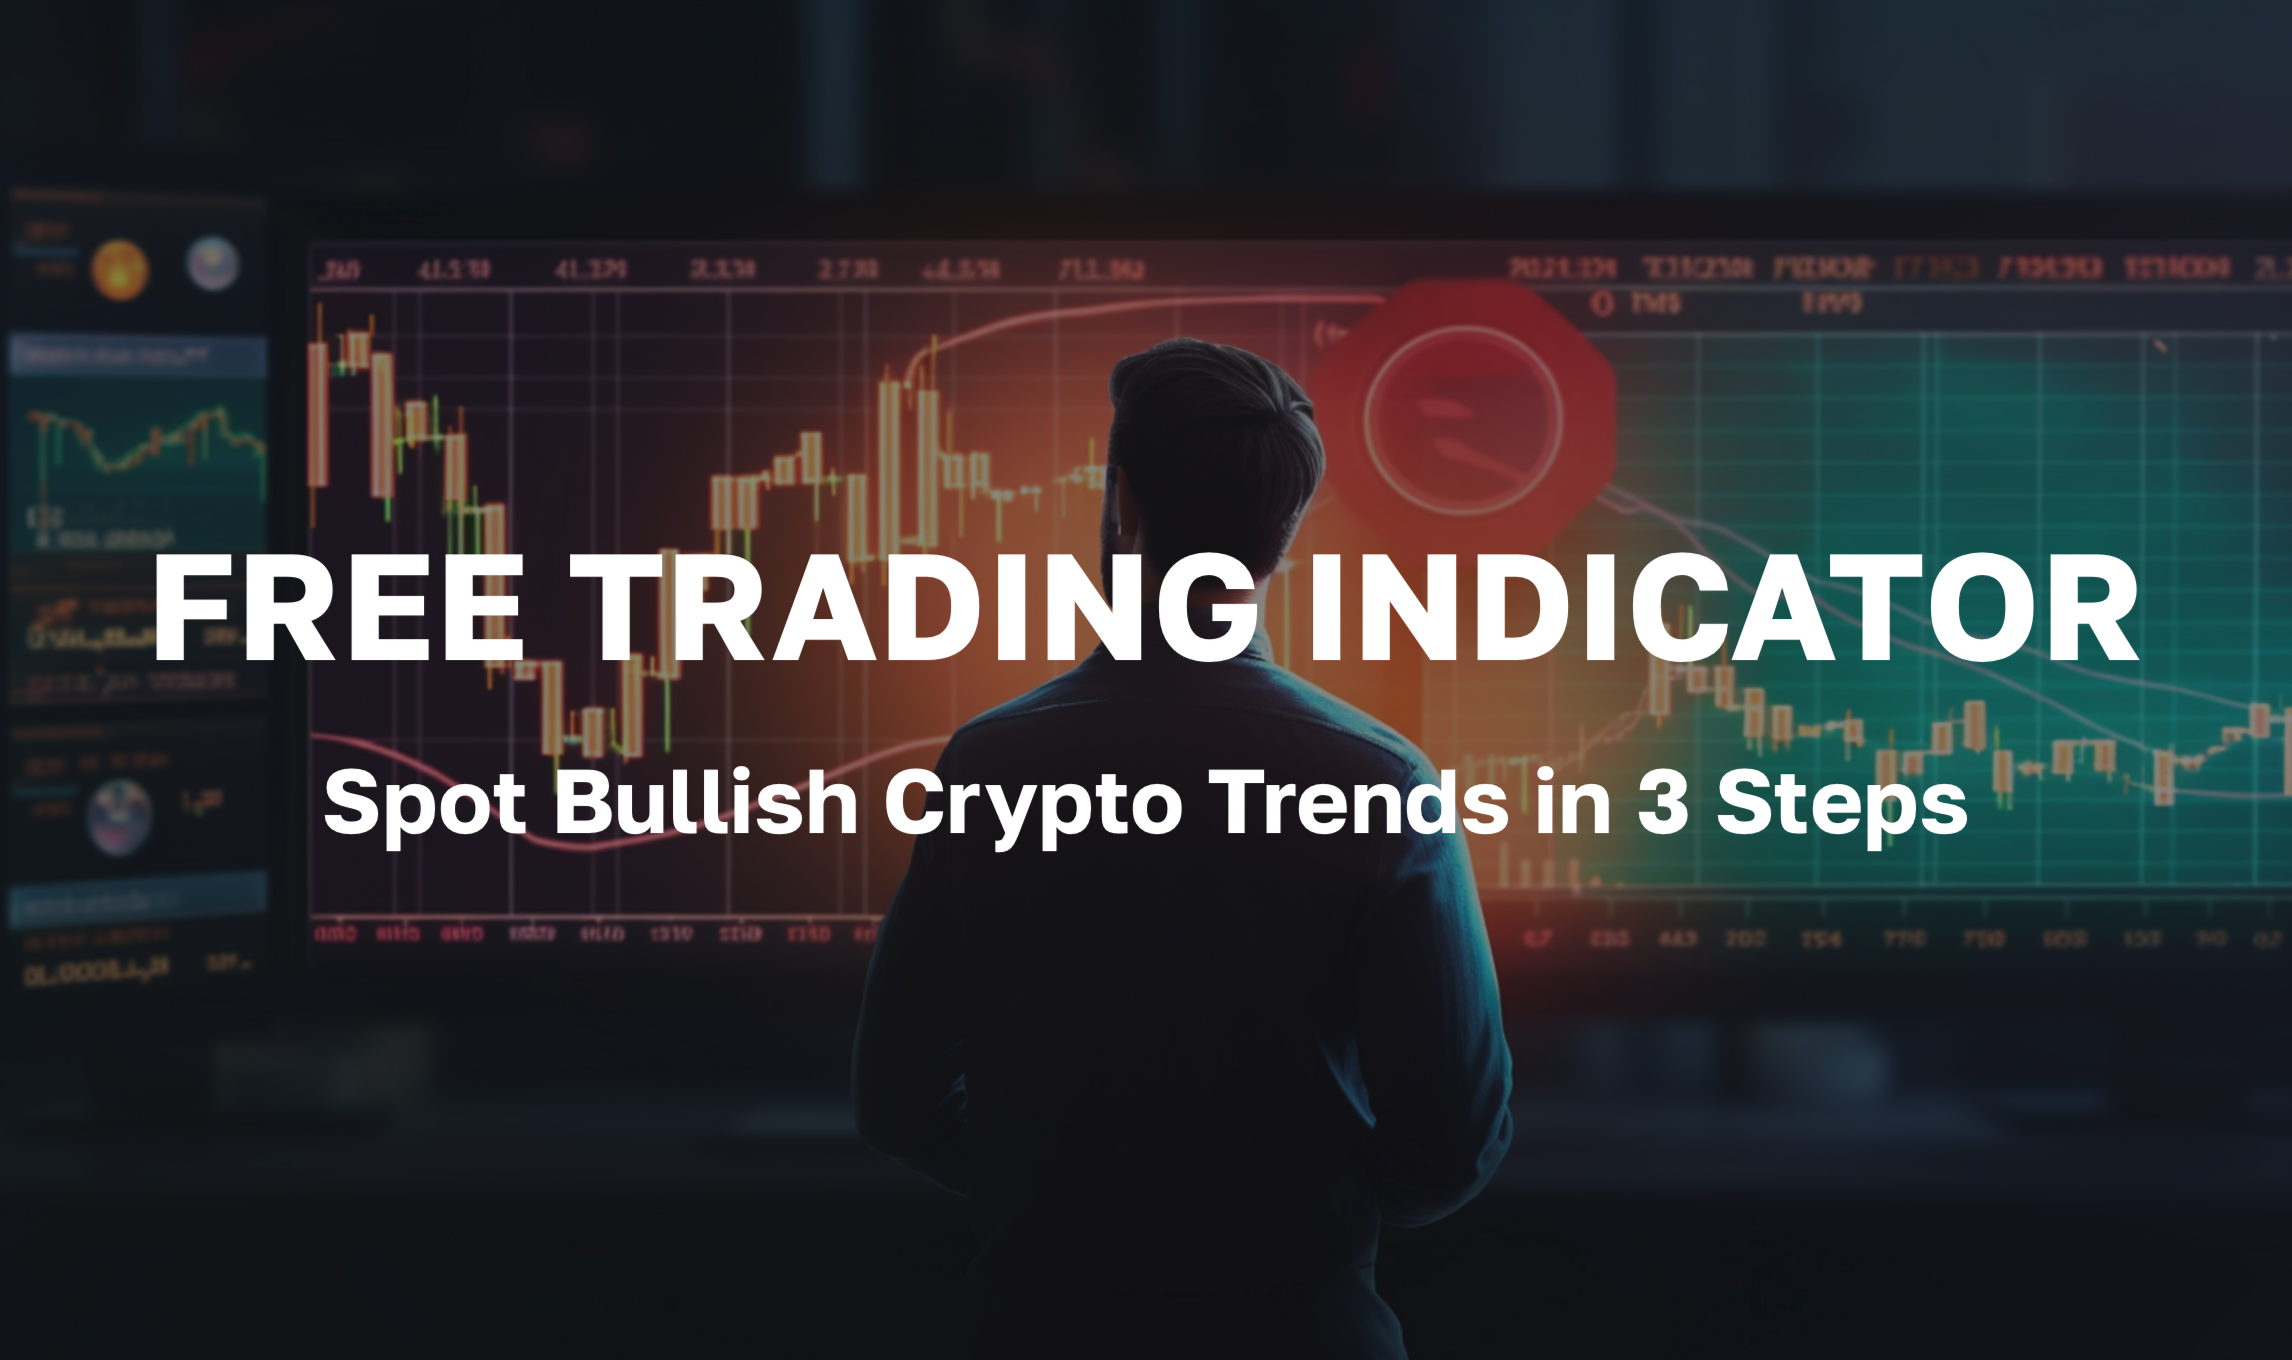 How to Find Bullish Crypto Trends in 3 Steps - Free On-Chain Indicator